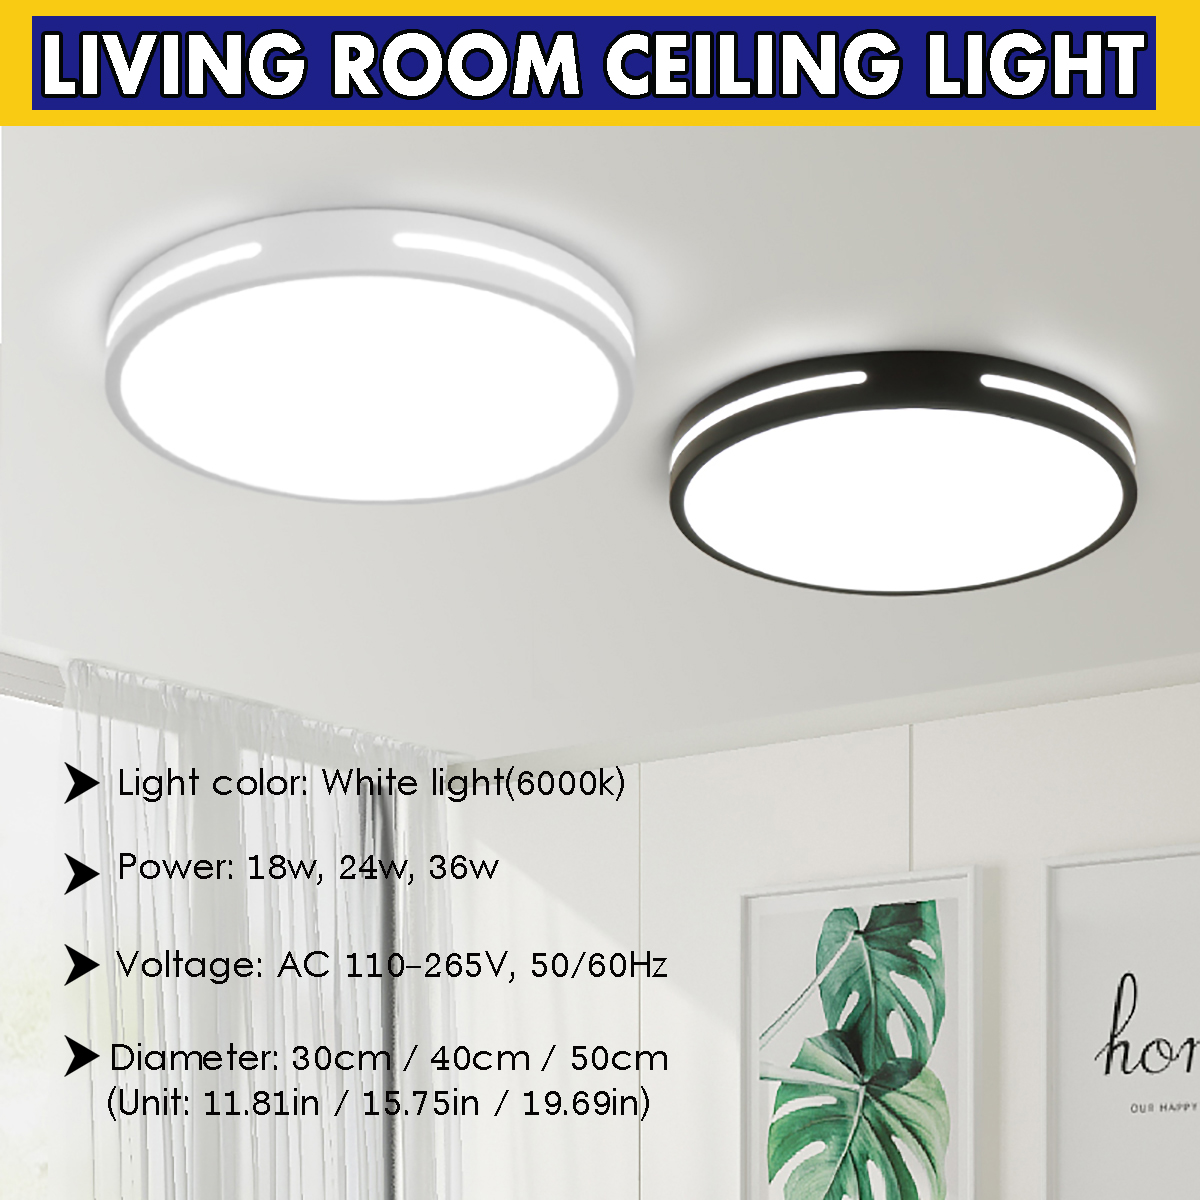 18W24W36W-6000K-White-LED-Ceiling-Light-Non-Dimmable-Indoor-Living-Bedroom-Lamp-for-Home-Decor-1770239-1